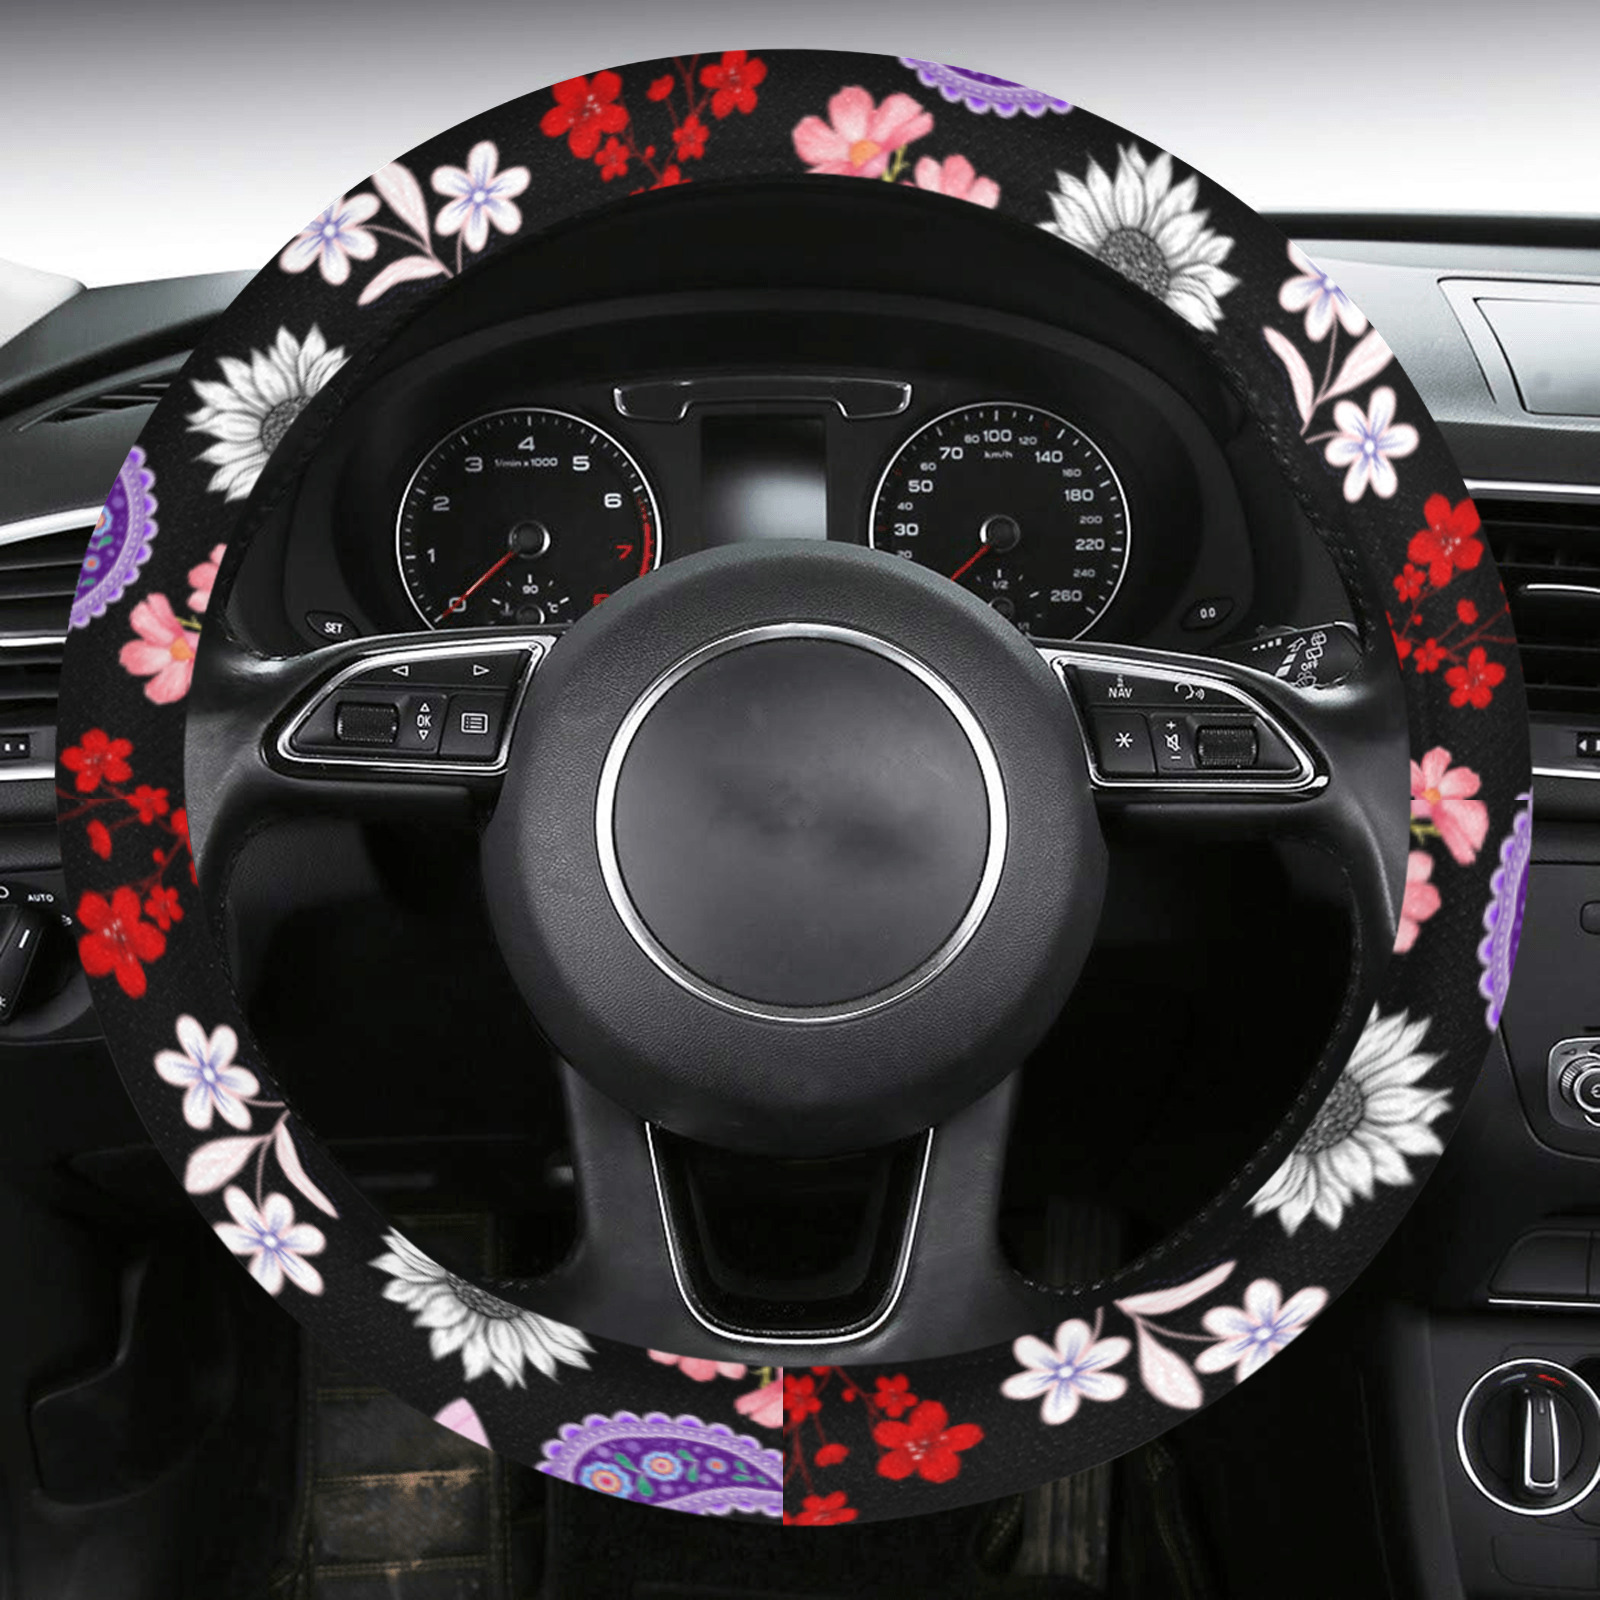 Black, Red, Pink, Purple, Dragonflies, Butterfly and Flowers Design Steering Wheel Cover with Anti-Slip Insert